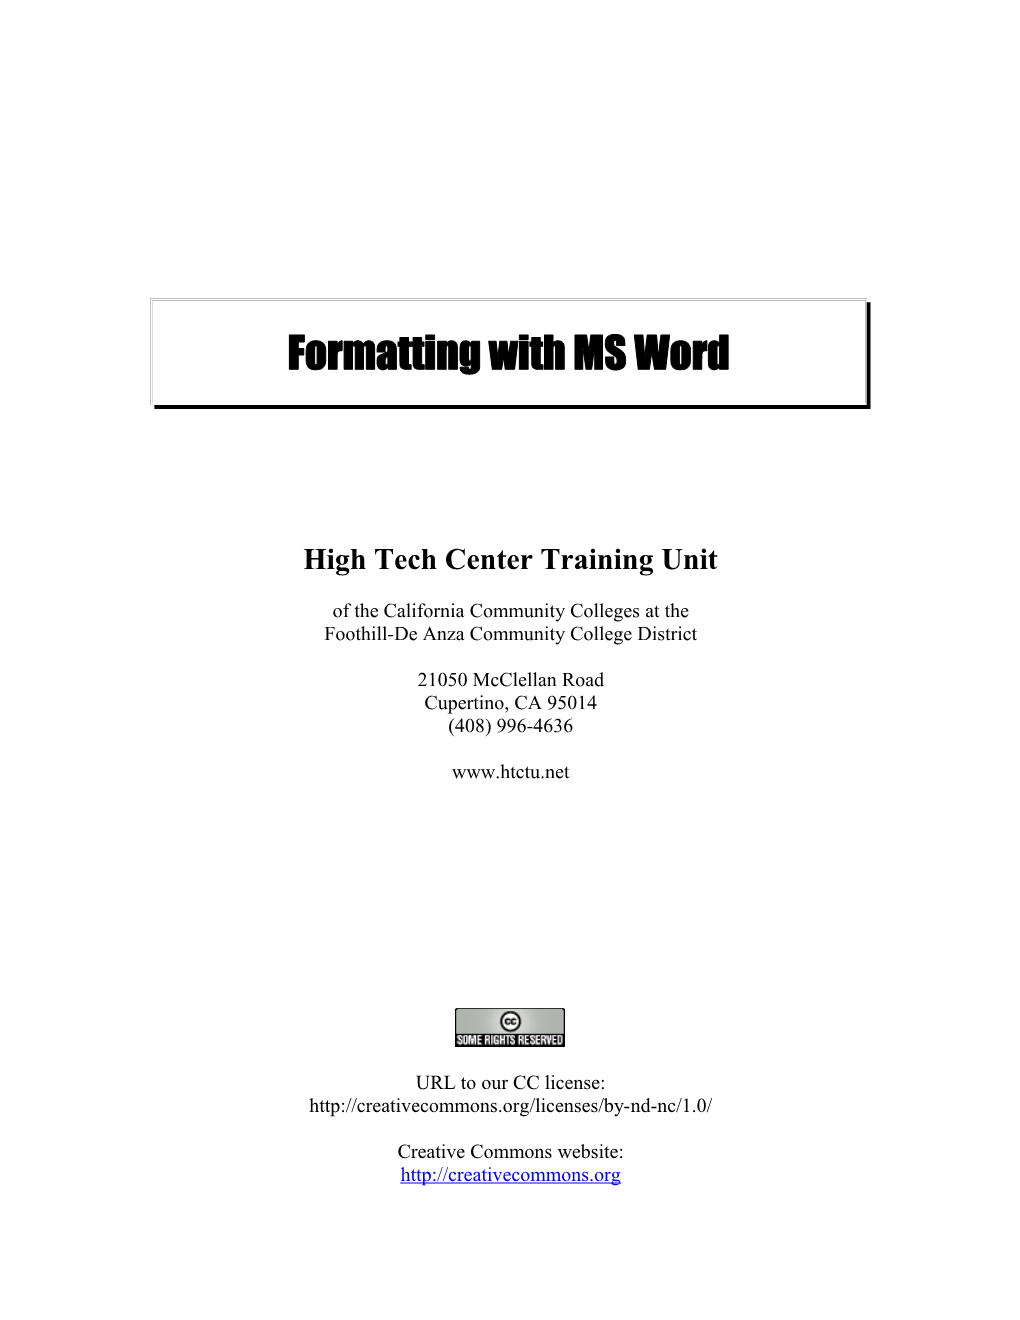 Formatting with MS Word